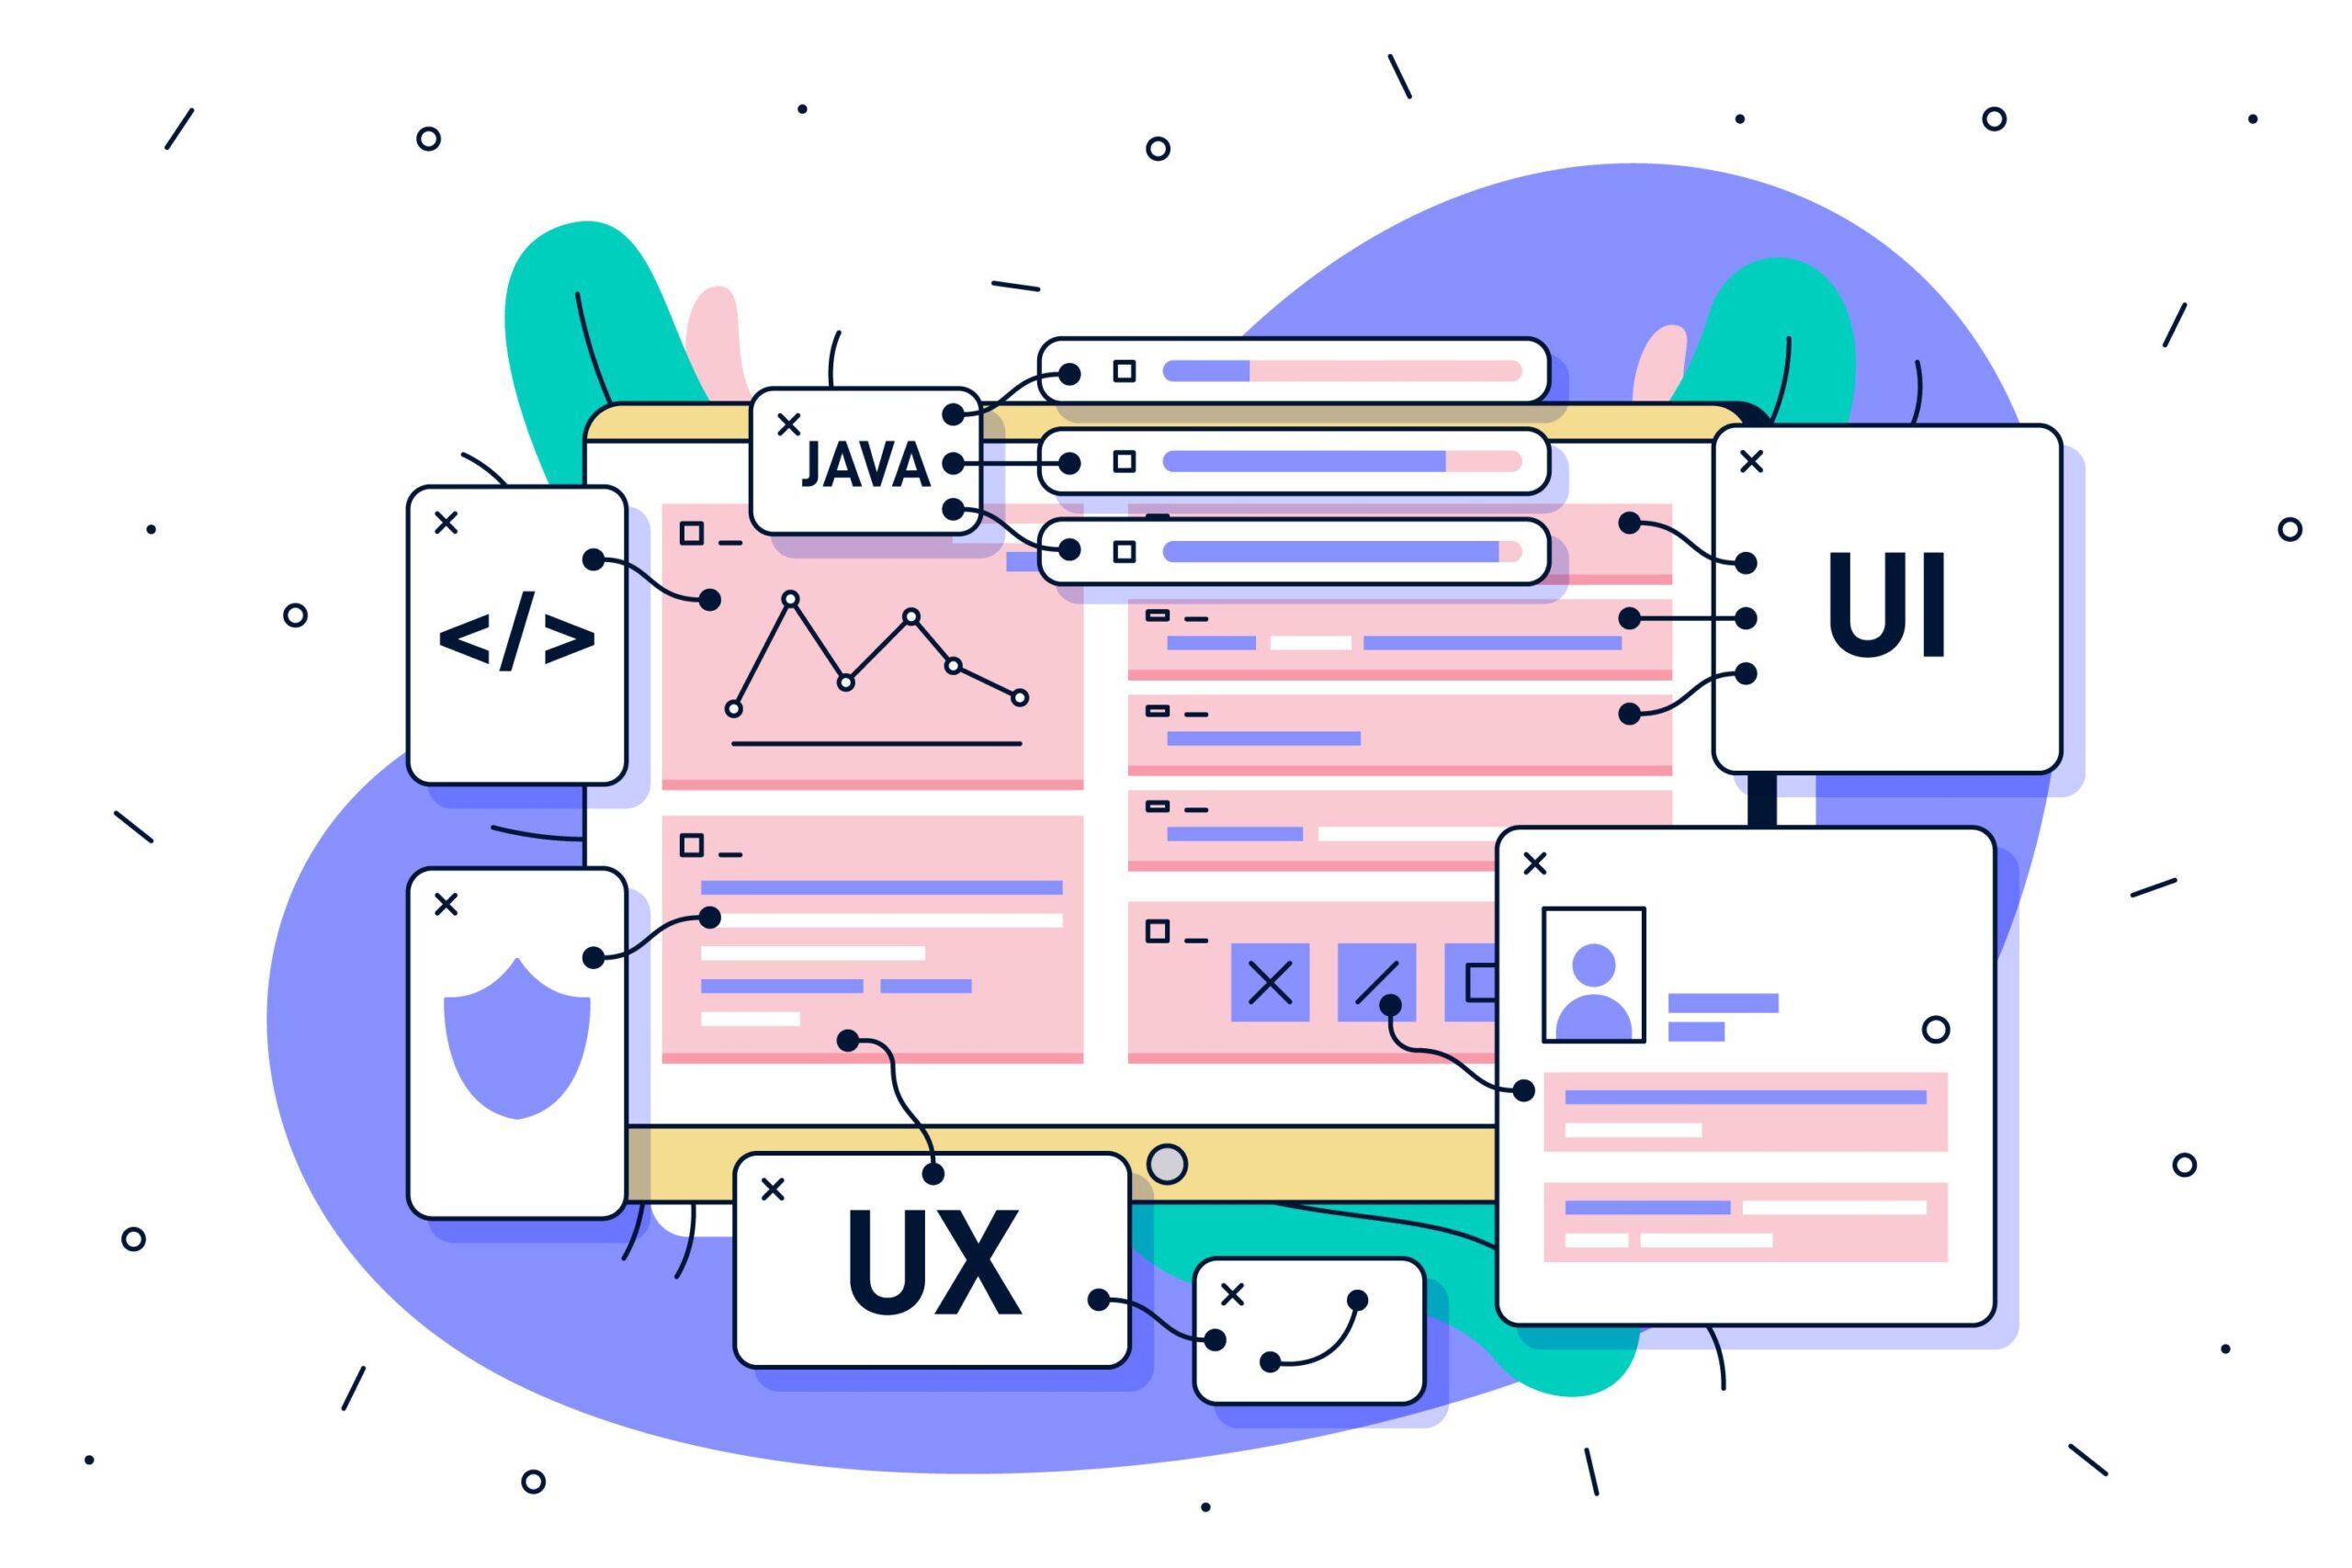 “The Impact of Microinteractions on User Engagement in UI/UX Design.”